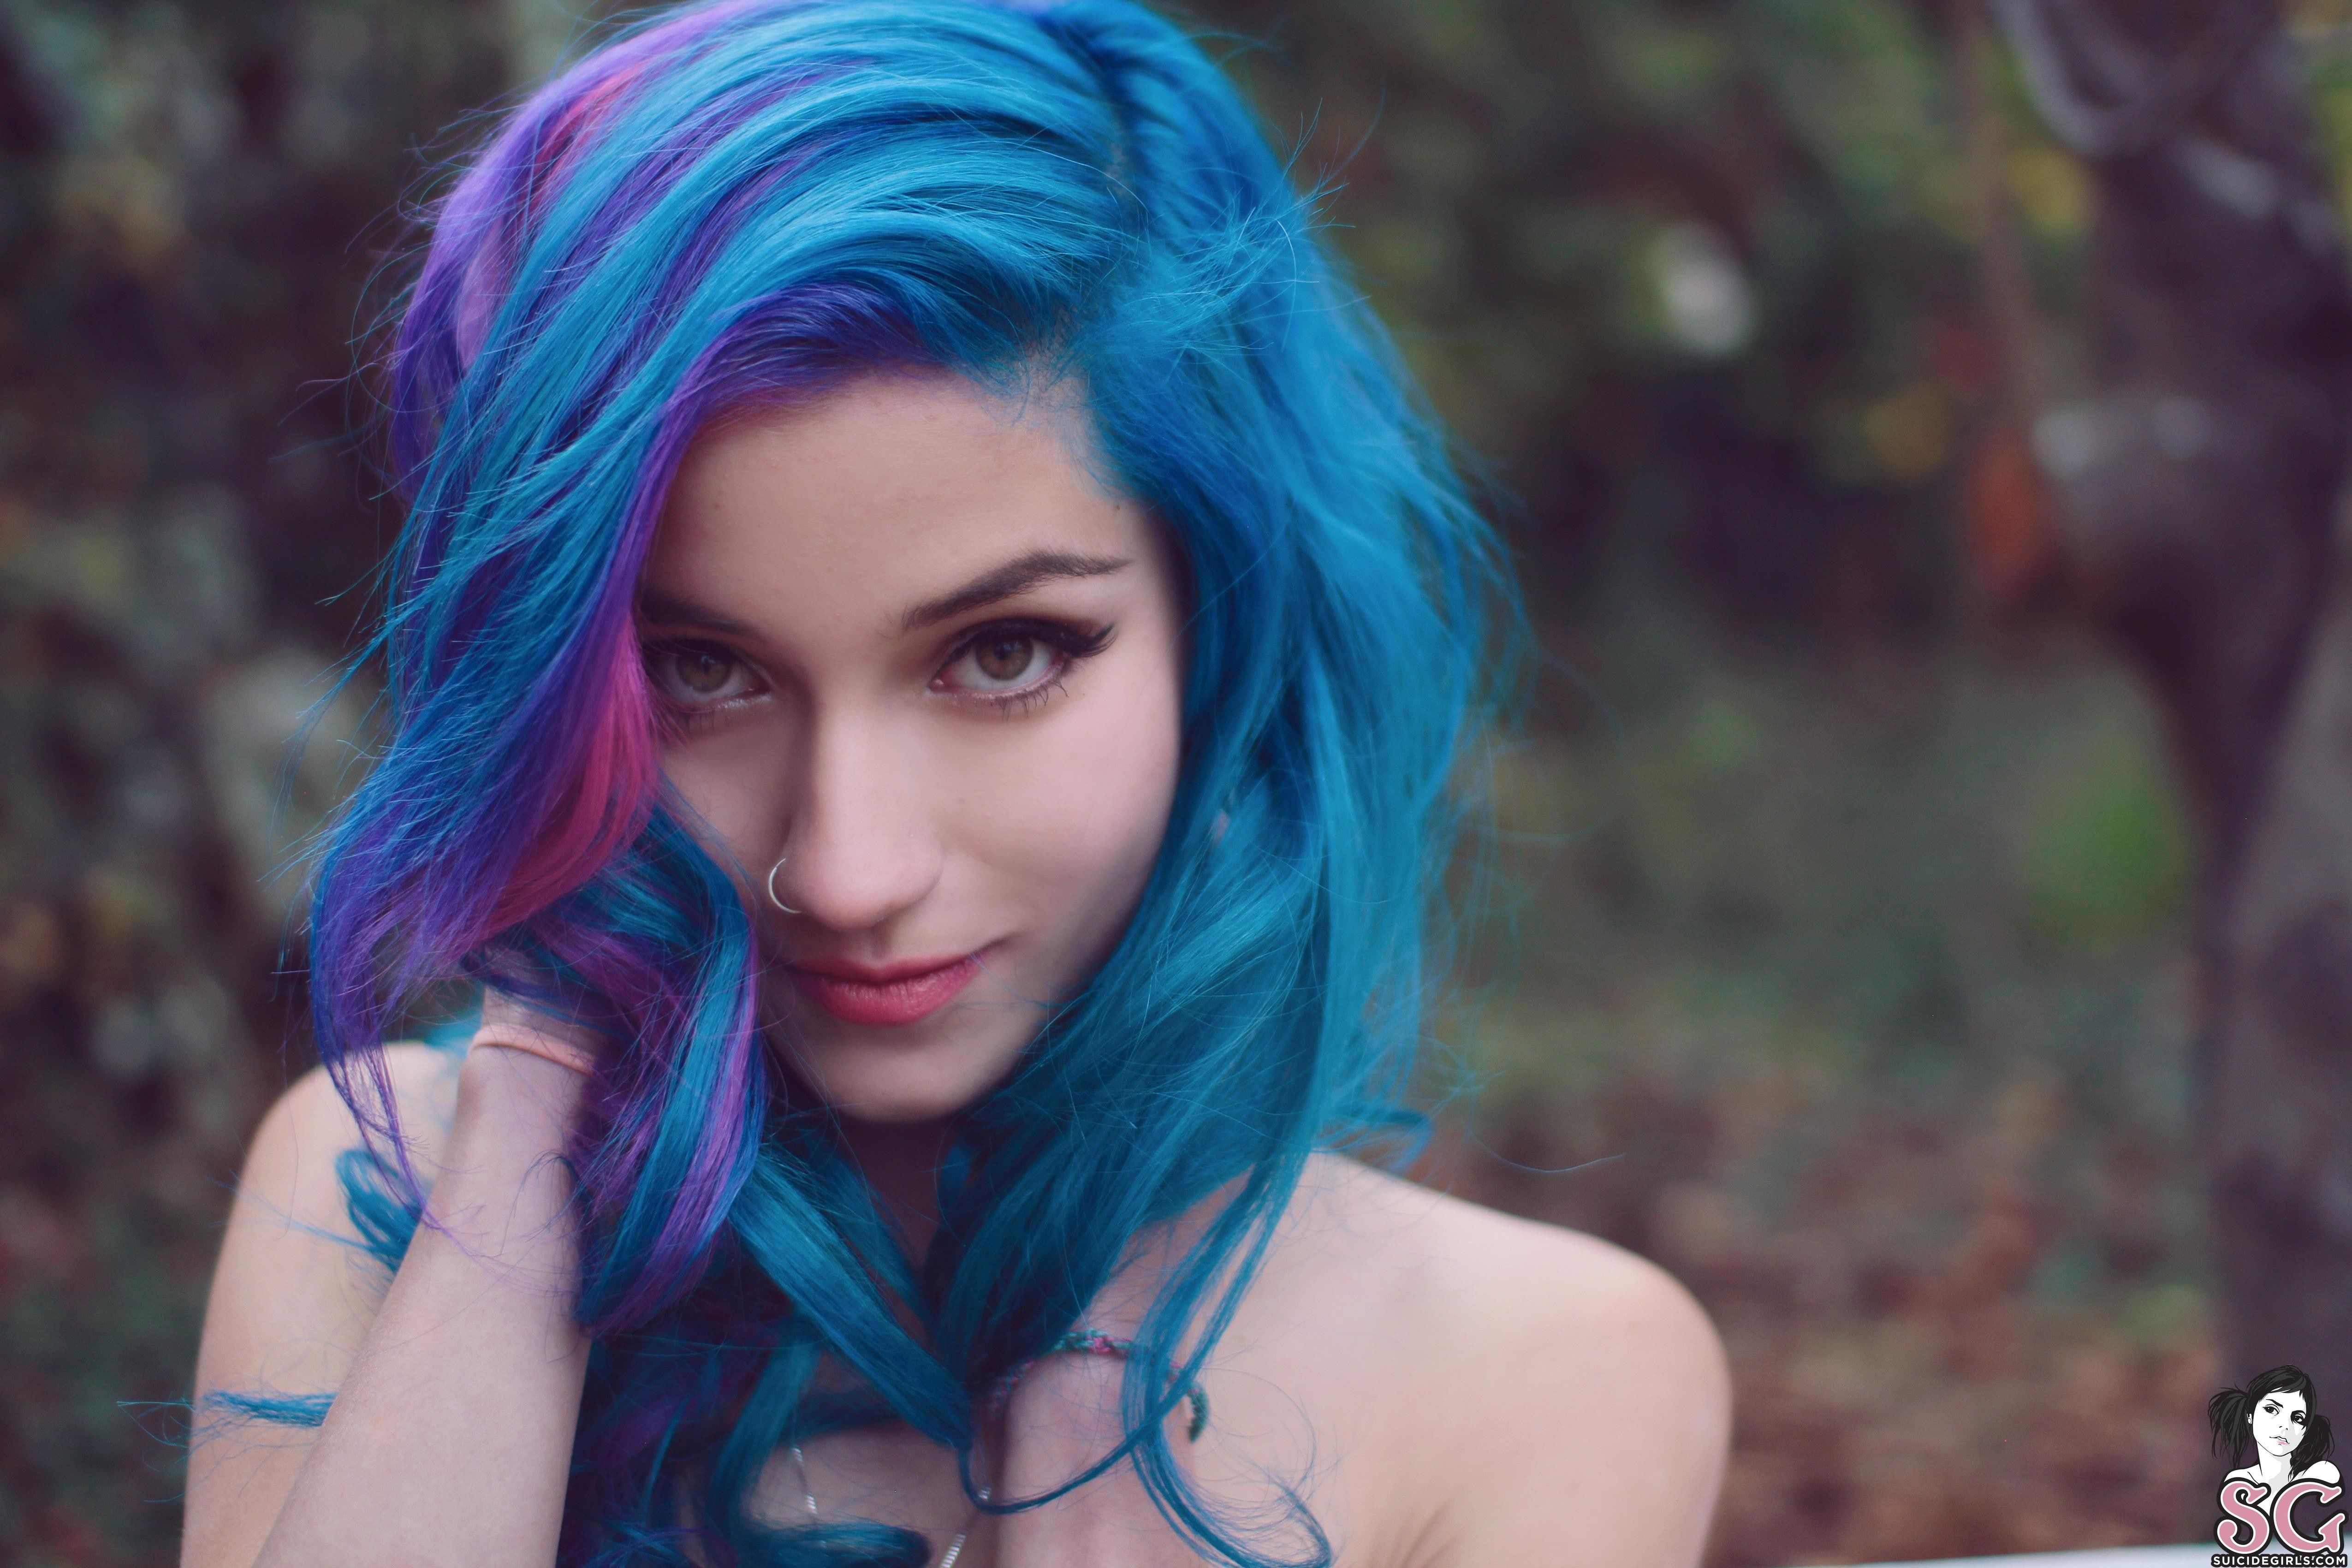 1. "The Girl with Blue Hair" - wide 6